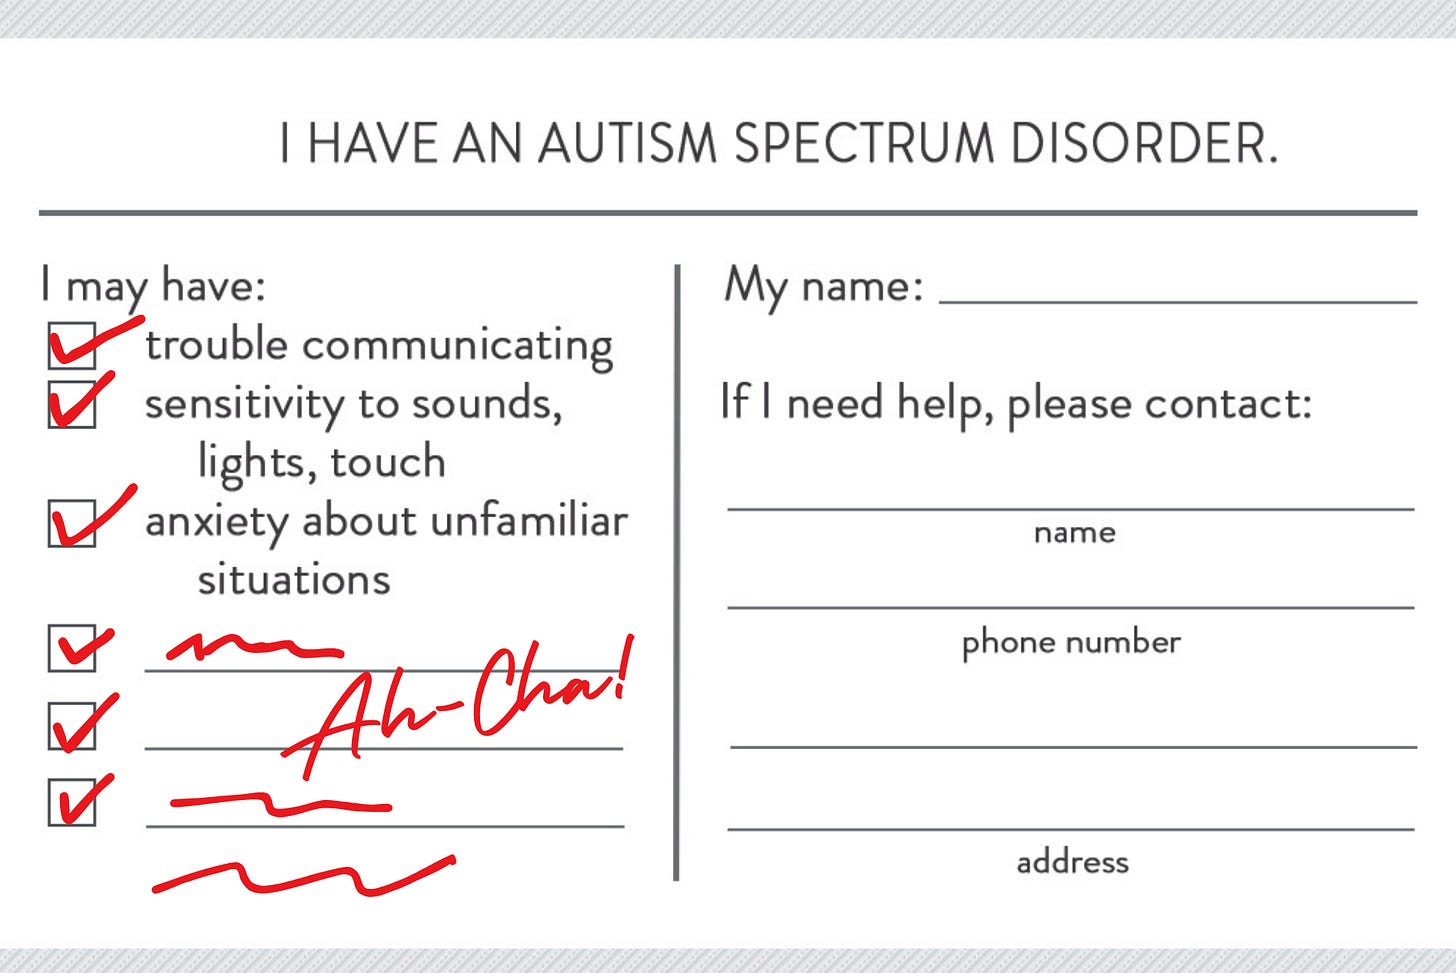 White card displaying "I have an Autism Spectrum Disorder" with lists of impacts